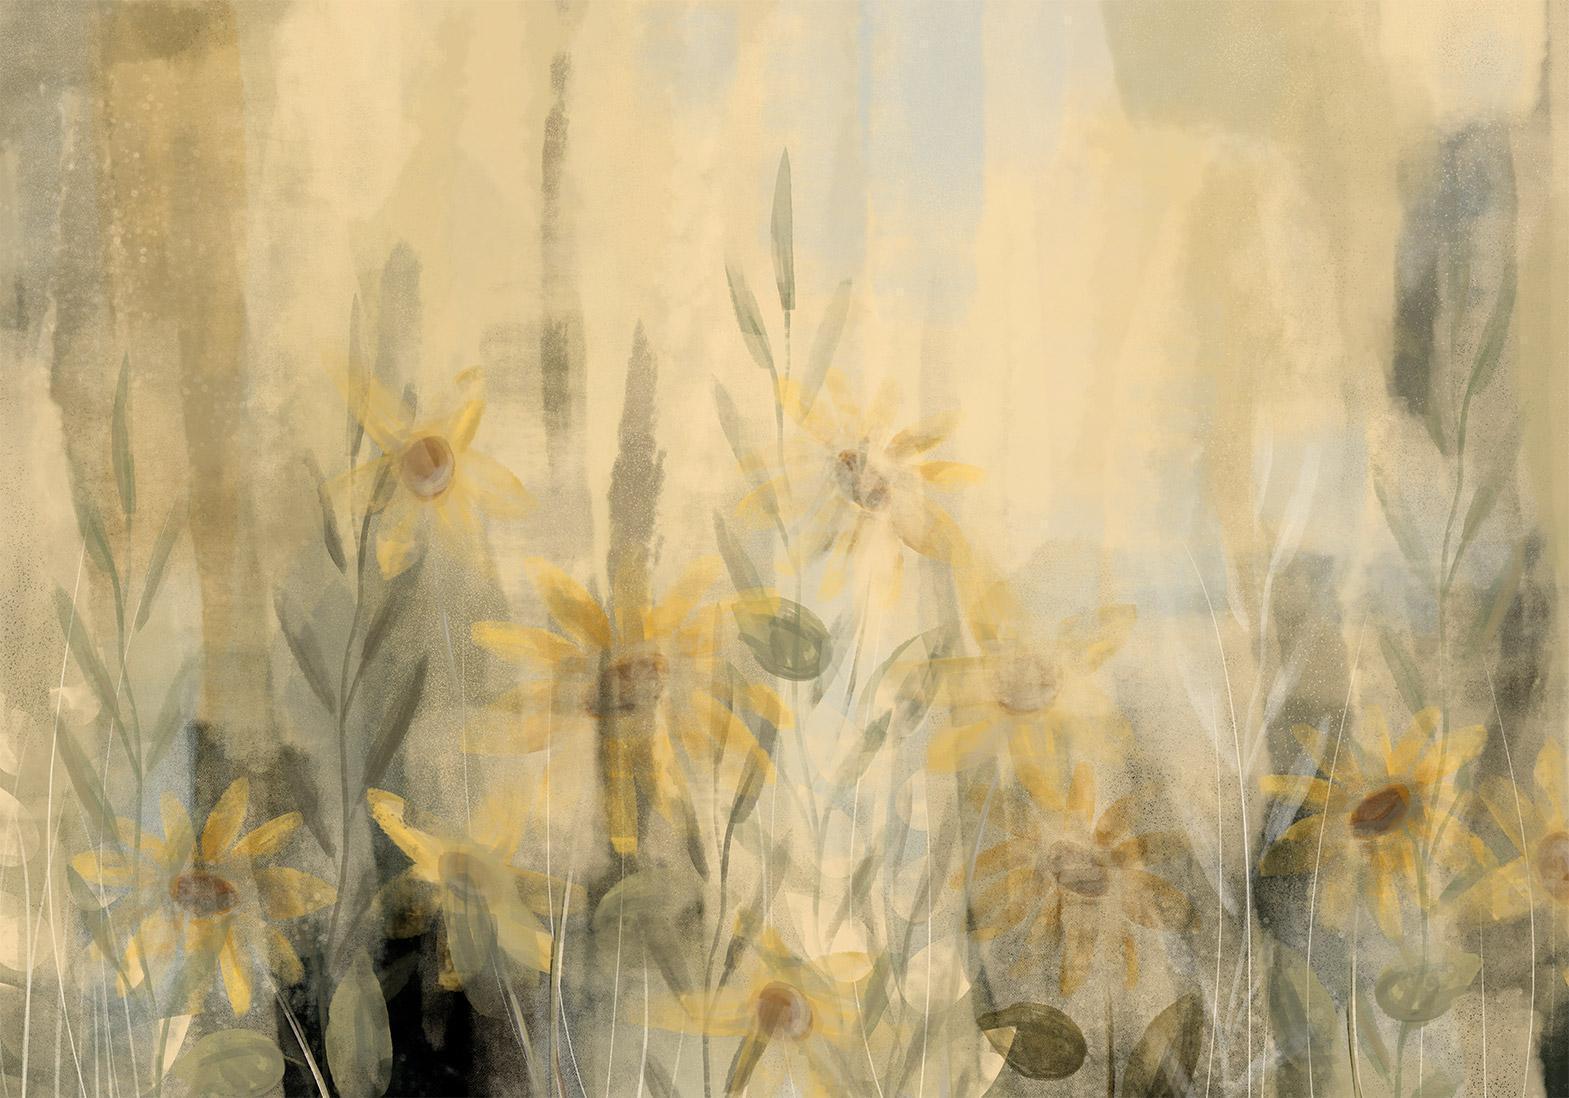 Papier peint - A touch of summer - floral motif with a meadow full of yellow flowers and grasses